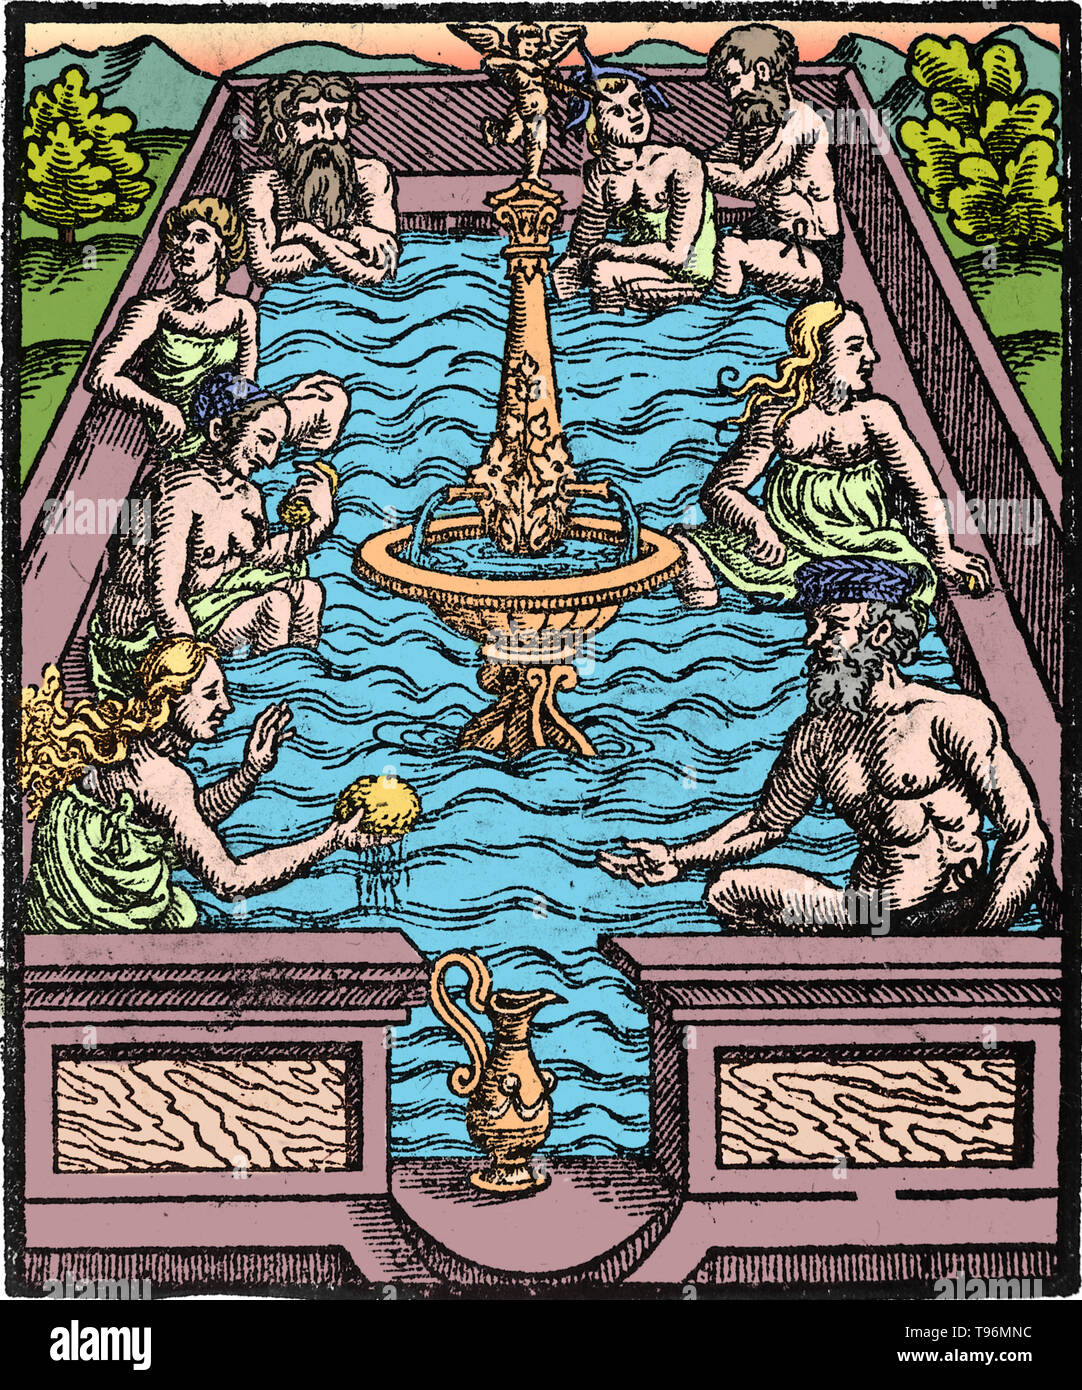 A mineral bath in the 16th century. Balneology is the branch of medical science concerned with the therapeutic value of baths, especially those taken with natural mineral waters. Balneotherapy may involve hot or cold water, massage through moving water, relaxation or stimulation. Many mineral waters at spas are rich in particular minerals (silica, sulfur, selenium, radium) which can be absorbed through the skin. Stock Photo